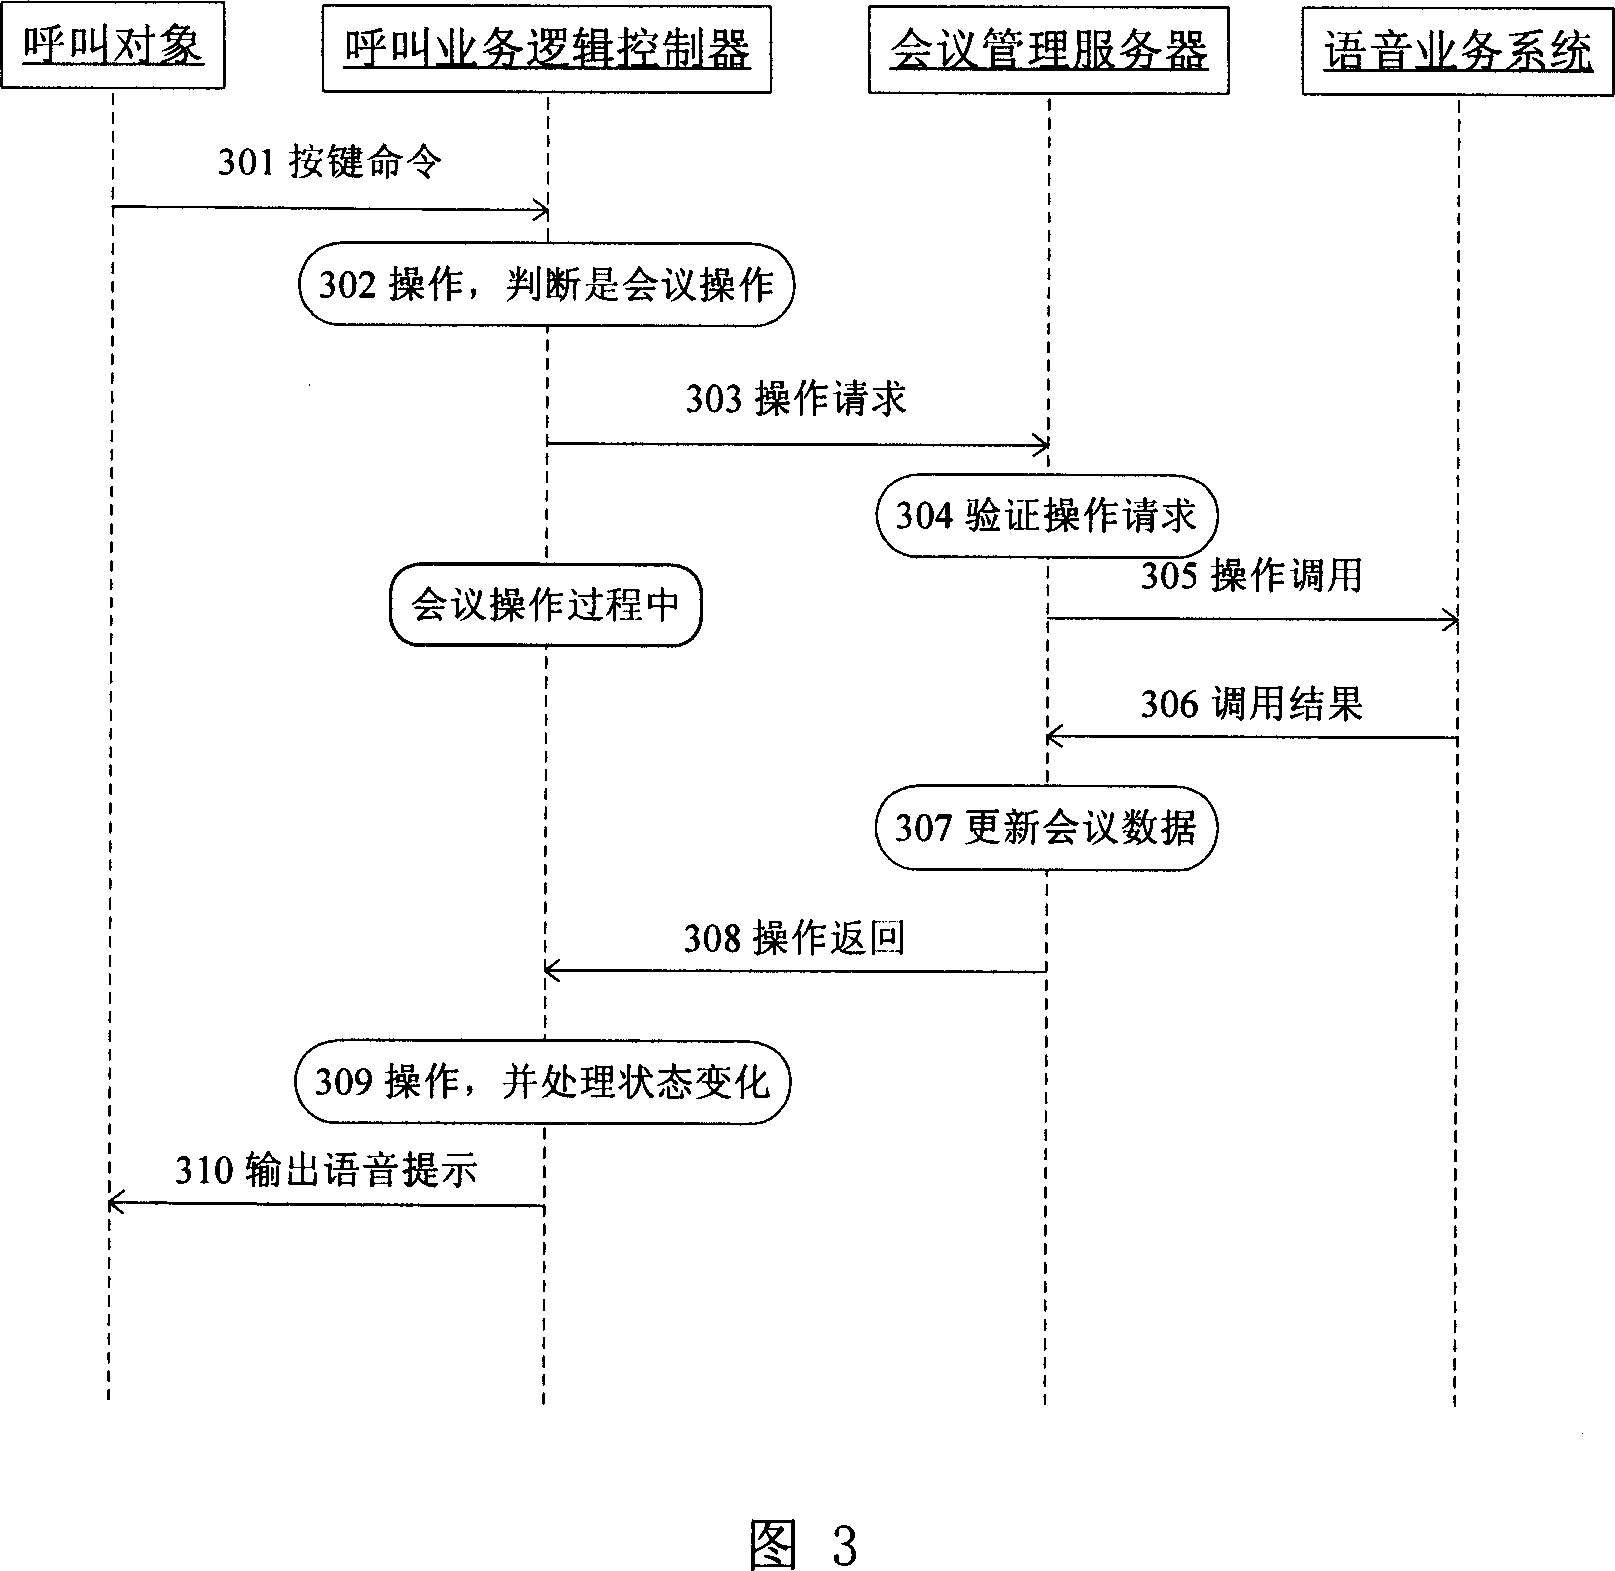 Method for implementing speech chat chamber service on telecommunication speech value increasing platform